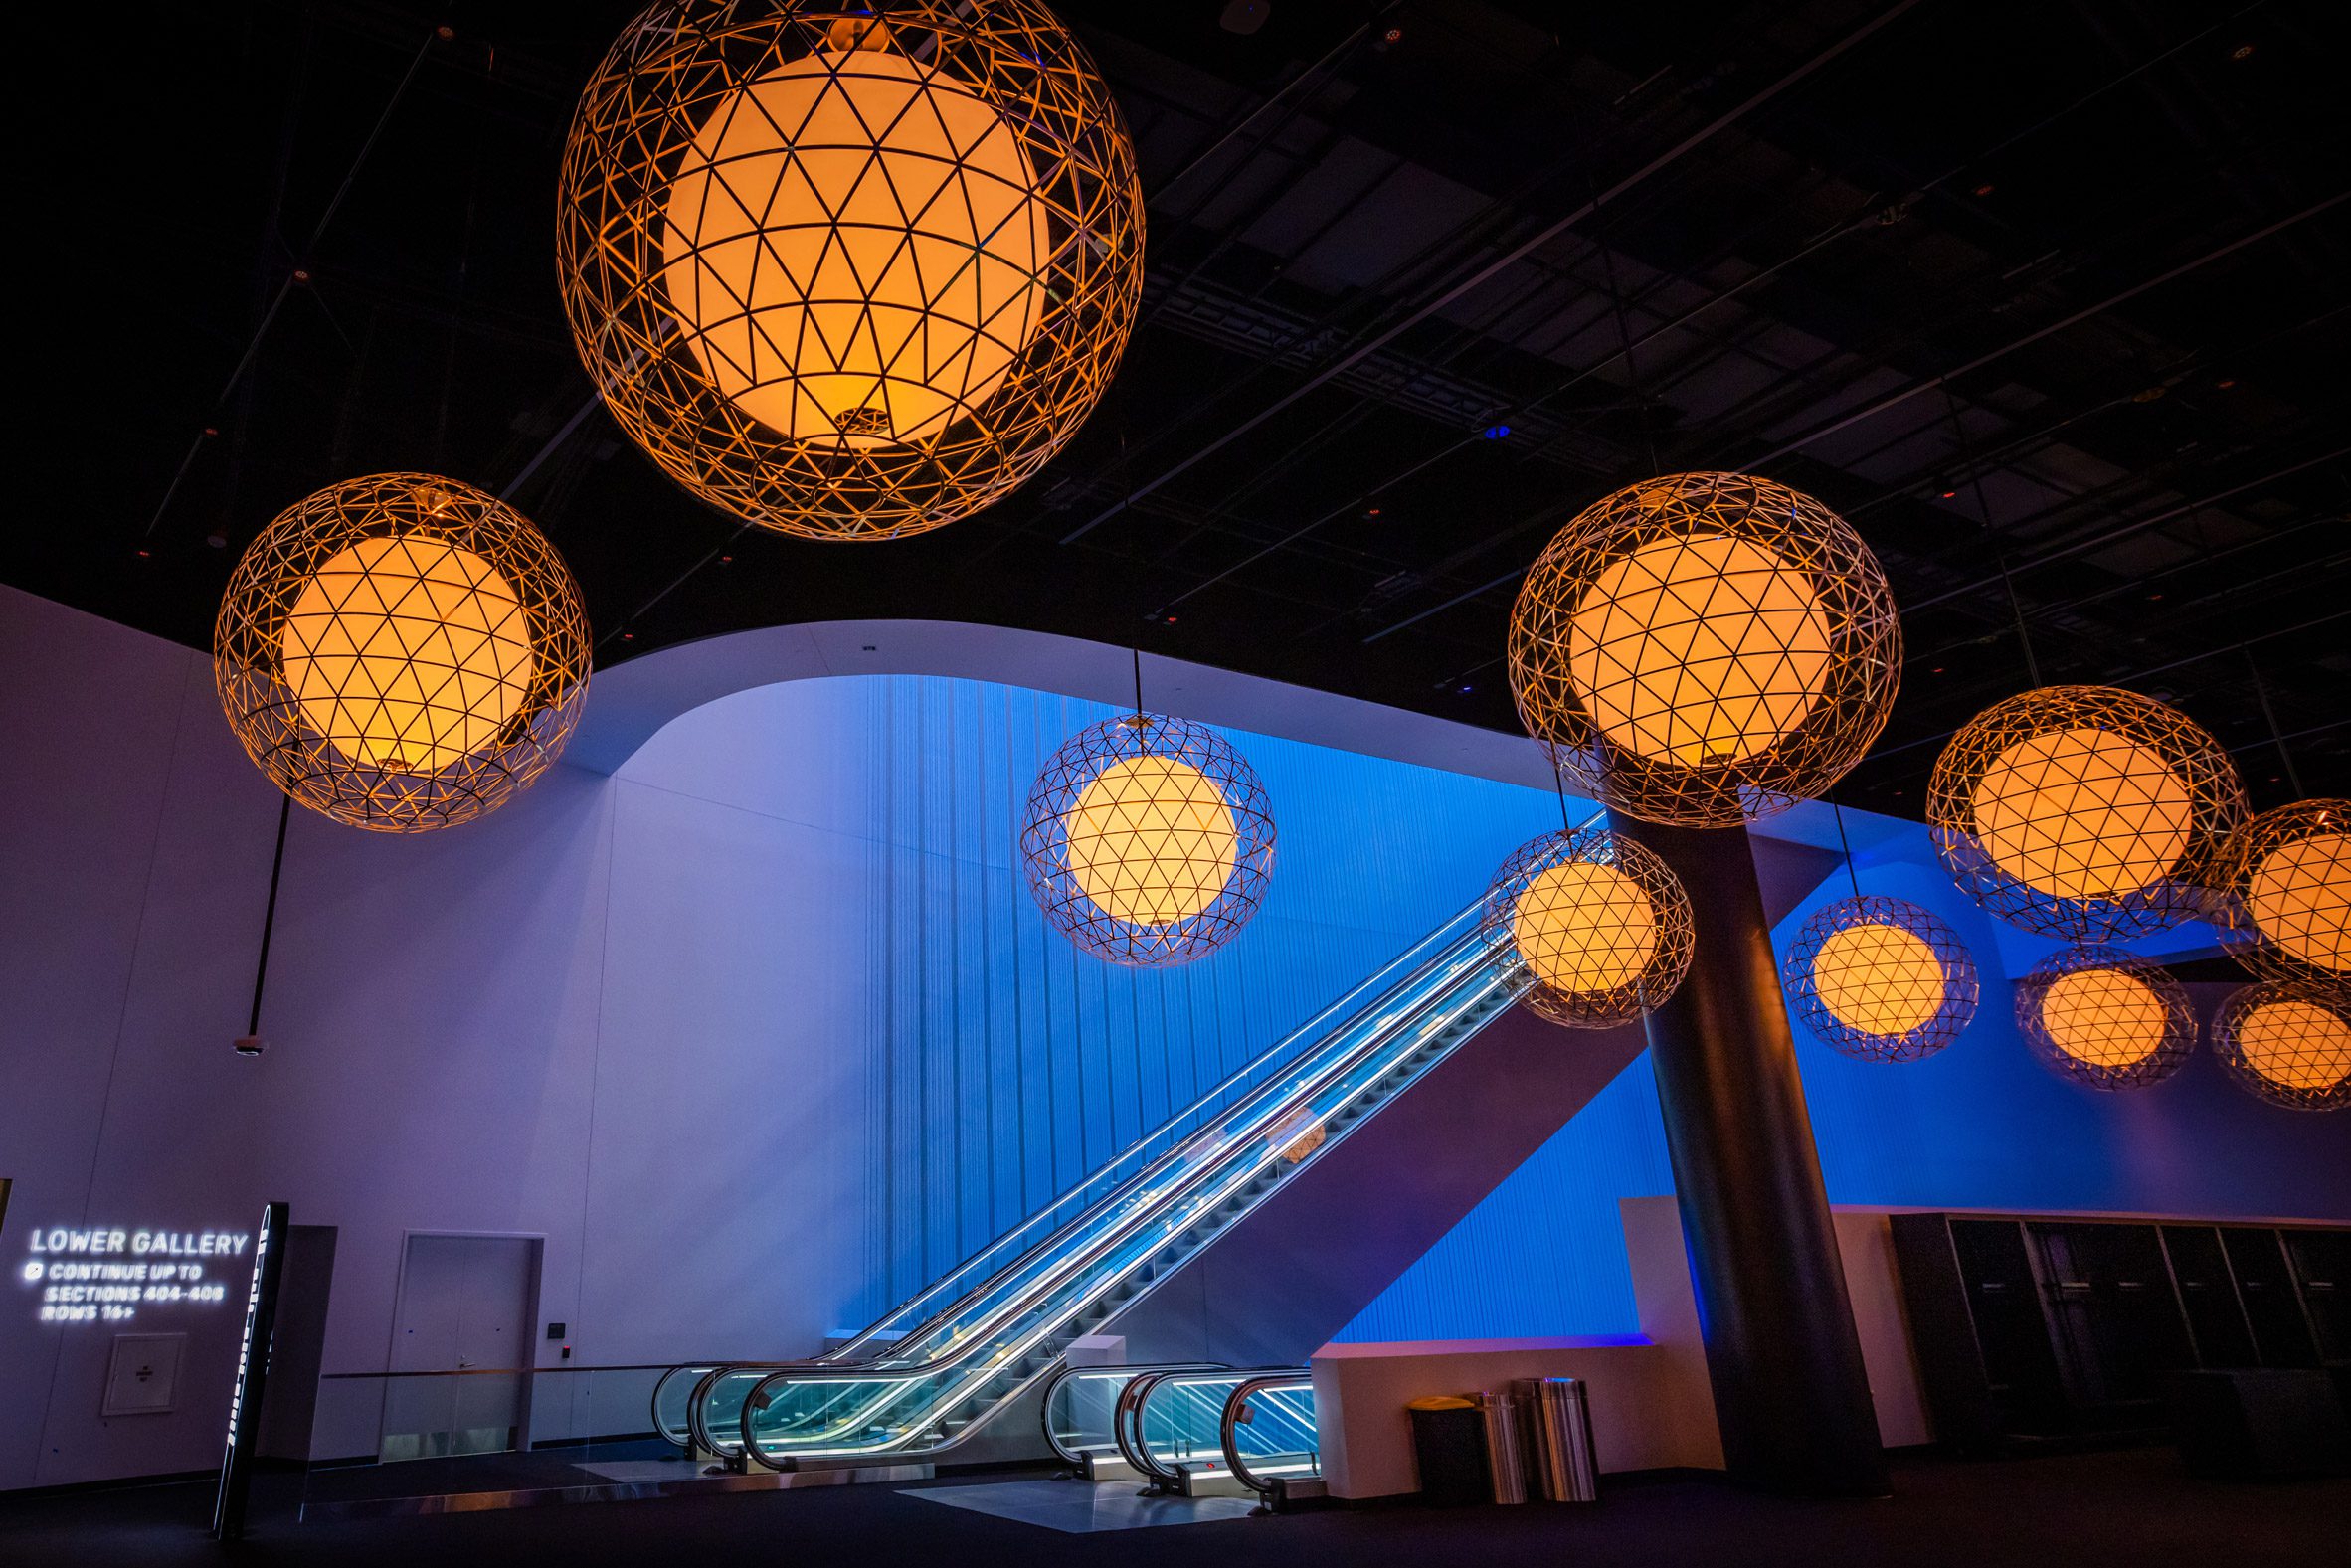 Scrim wall behind an escalator bank, with spherical pendant lights in the foreground